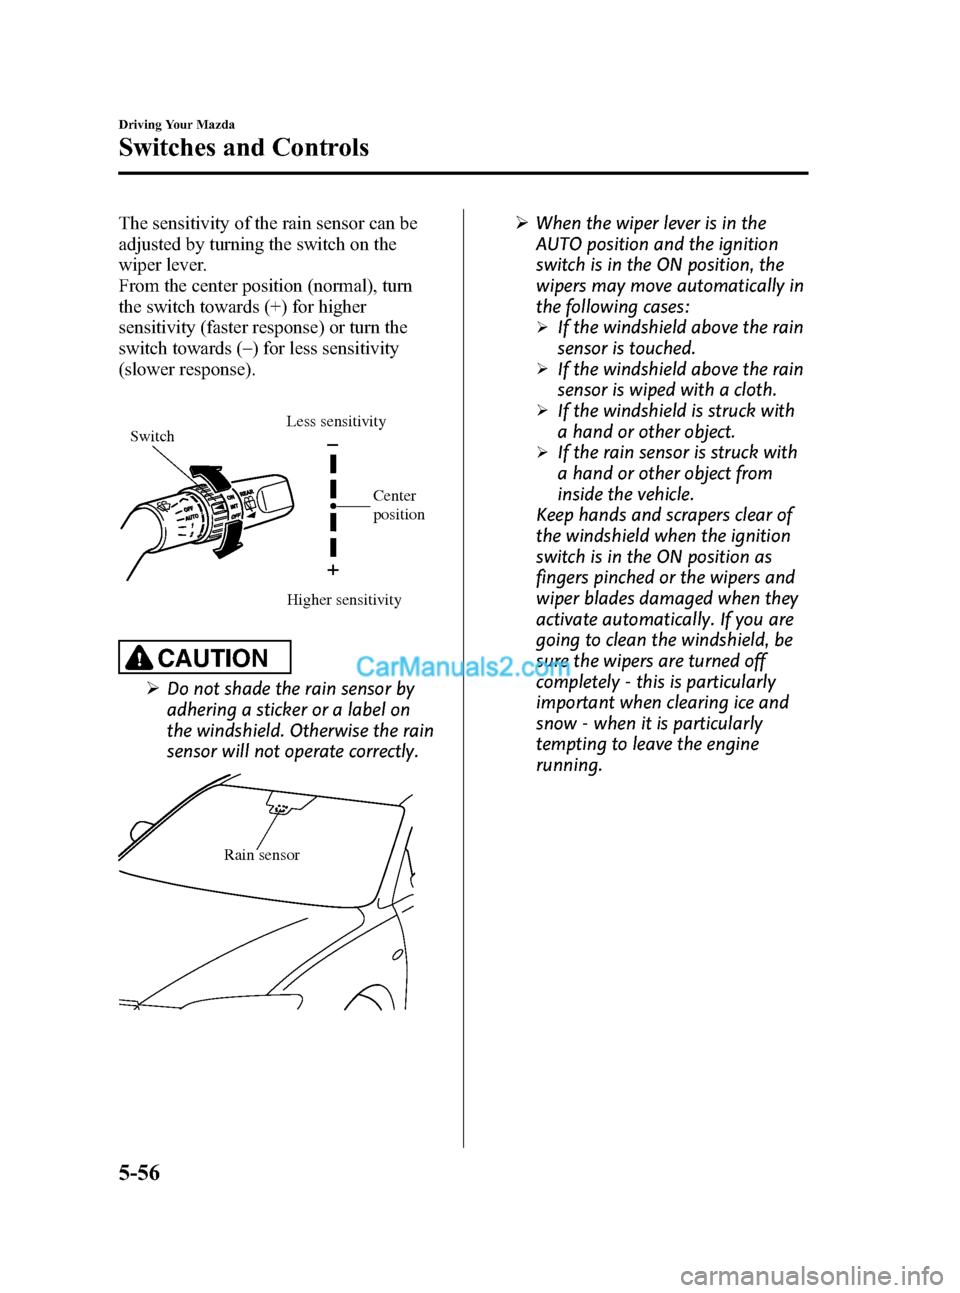 MAZDA MODEL MAZDASPEED 3 2008  Owners Manual (in English) Black plate (174,1)
The sensitivity of the rain sensor can be
adjusted by turning the switch on the
wiper lever.
From the center position (normal), turn
the switch towards (+) for higher
sensitivity (